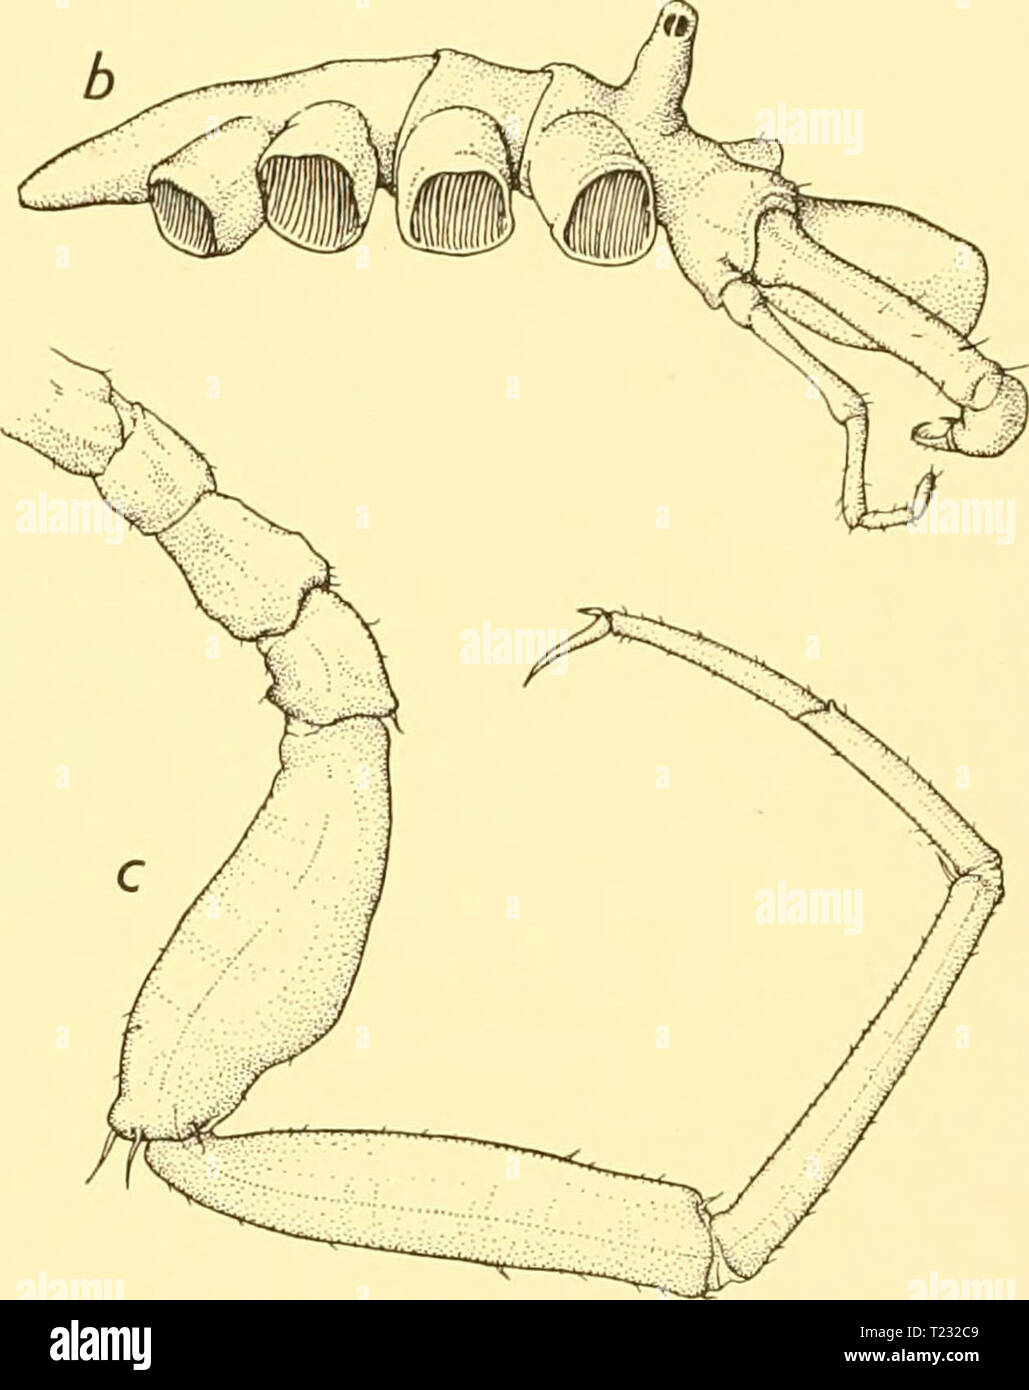 Archive image from page 79 of Discovery reports (1932) Discovery reports  discoveryreports06inst Year: 1932  Fig. 30. Nymphon neumayri, n.sp.: a. Holotype. Dorsal view of body with chelophores and palps. b. Holotype. Lateral view of body, with chelophore and palp. c. Third leg of female. Measurements {mm.) Length of proboscis ... Diameter of proboscis Length of trunk Length of cephalic segment Width of cephalic lobes Width across second lateral processes Length of abdomen Length of scape Length of chela Third right leg: First coxa ... Second coxa Third coxa ... Femur First tibia ... Second tib Stock Photo